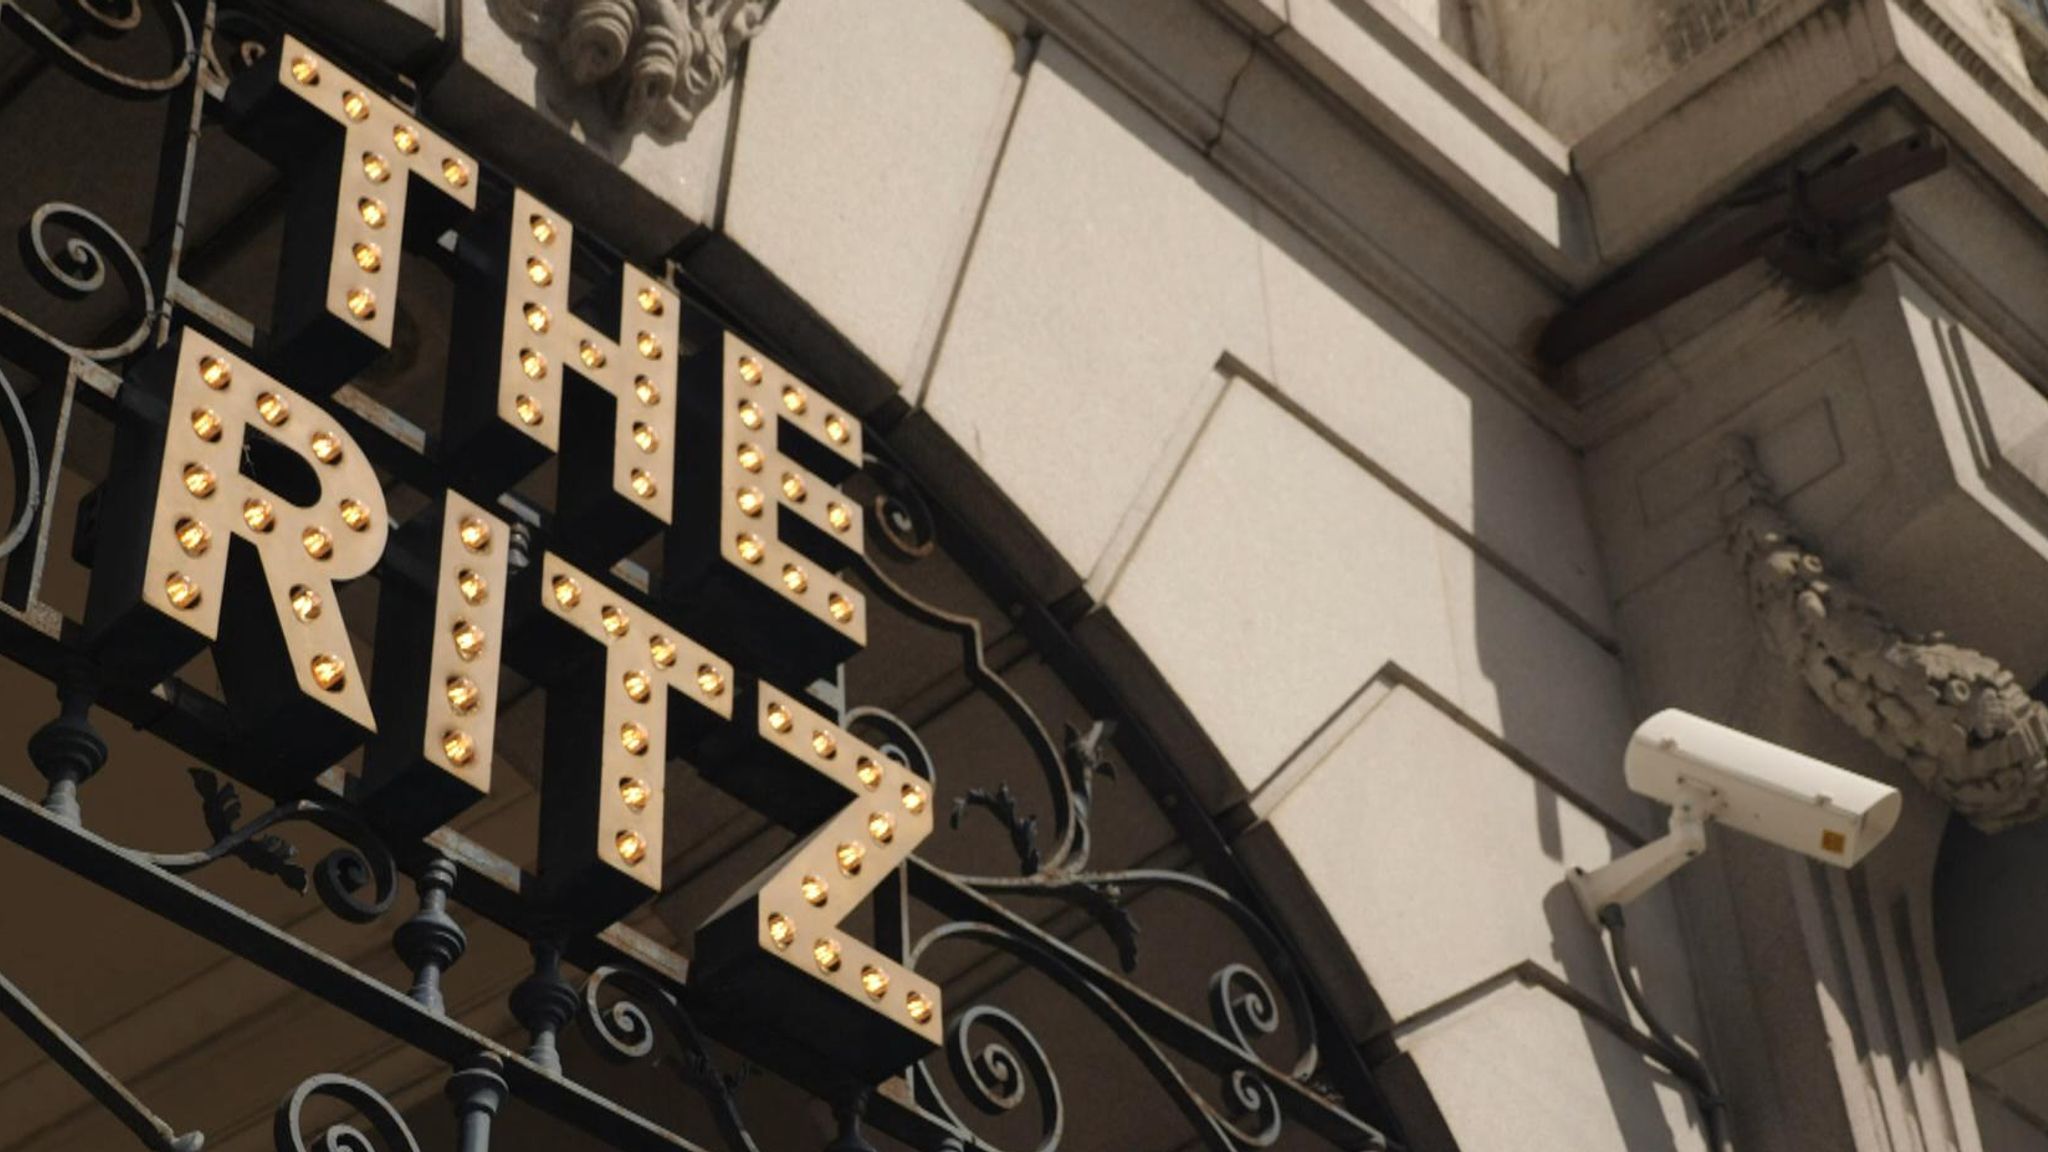 Billionaire Brothers Sell London's Ritz Hotel As Barclay Family